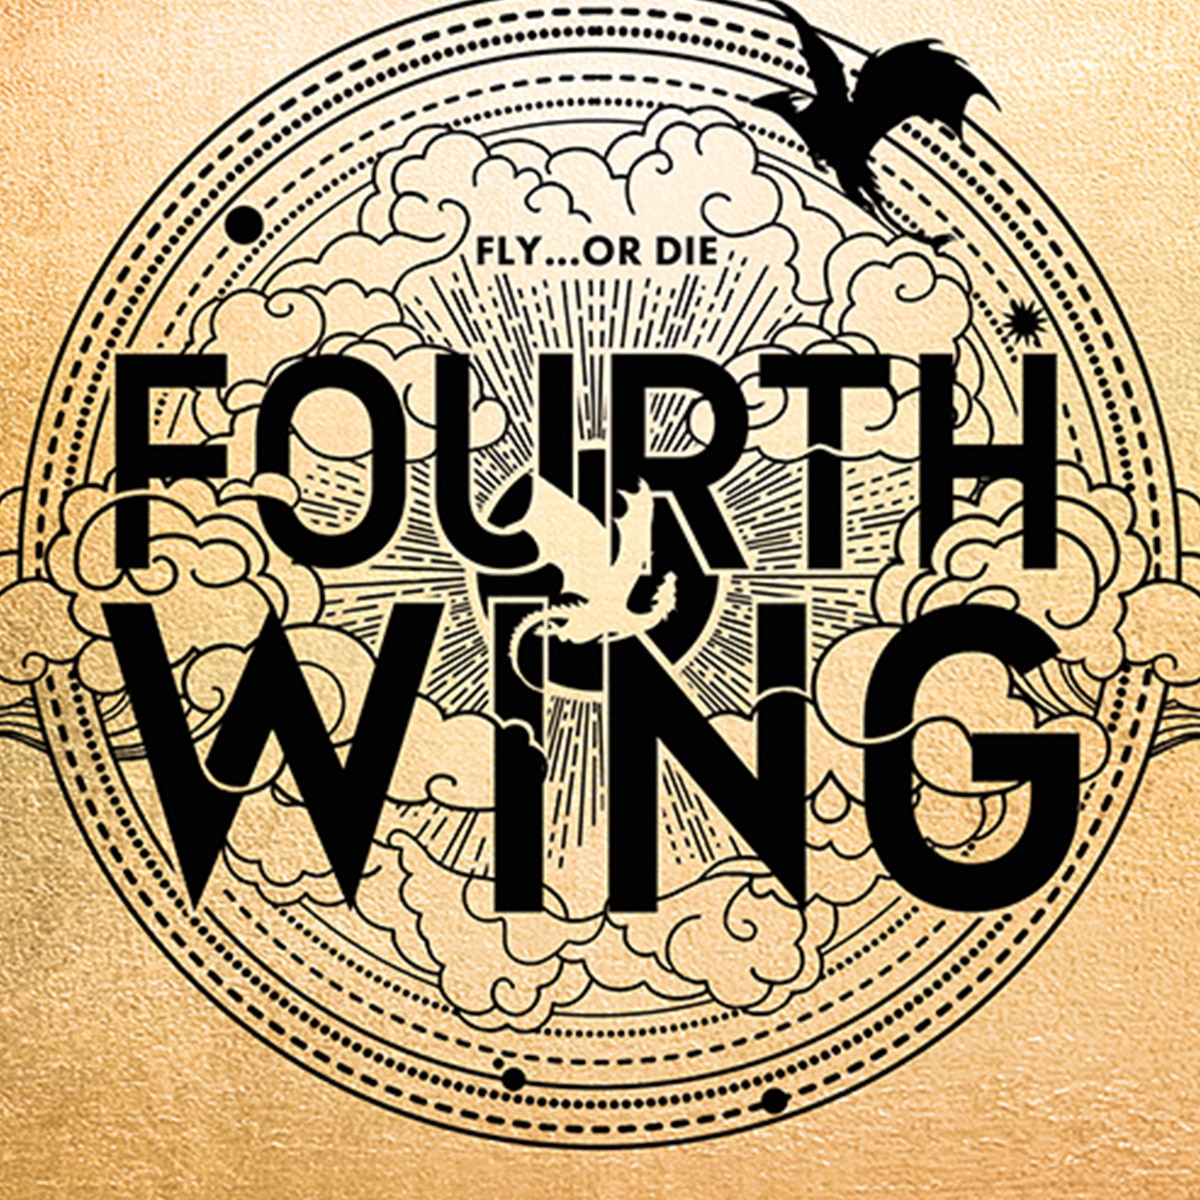 Fourth Wing's Rebecca Yarros Reveals Release Date of 3rd Book